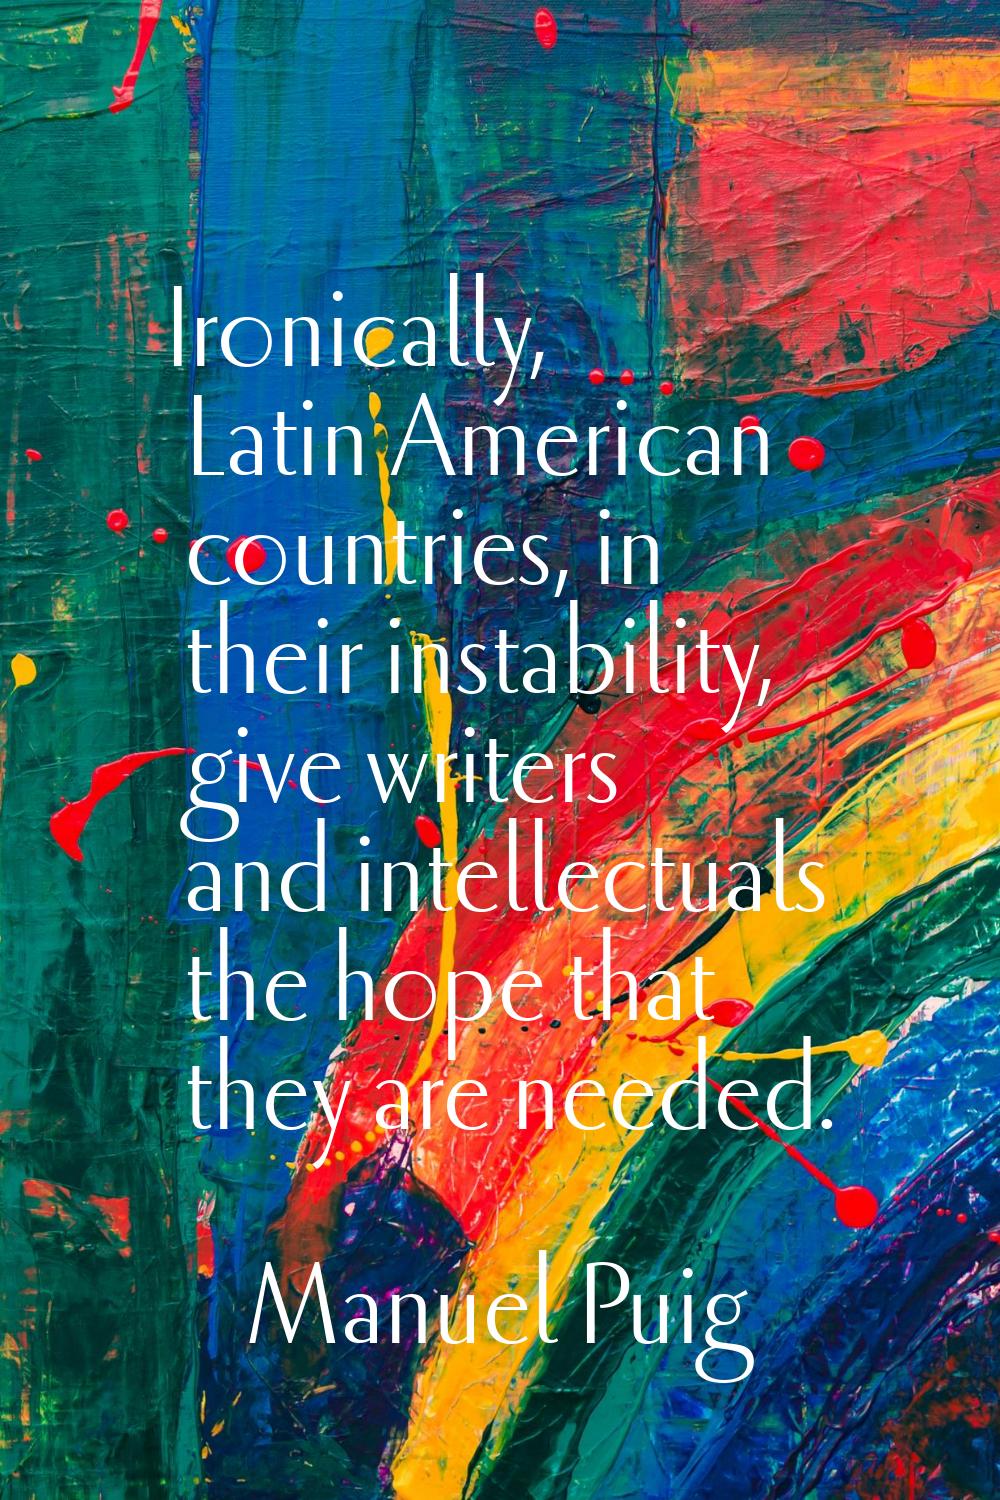 Ironically, Latin American countries, in their instability, give writers and intellectuals the hope